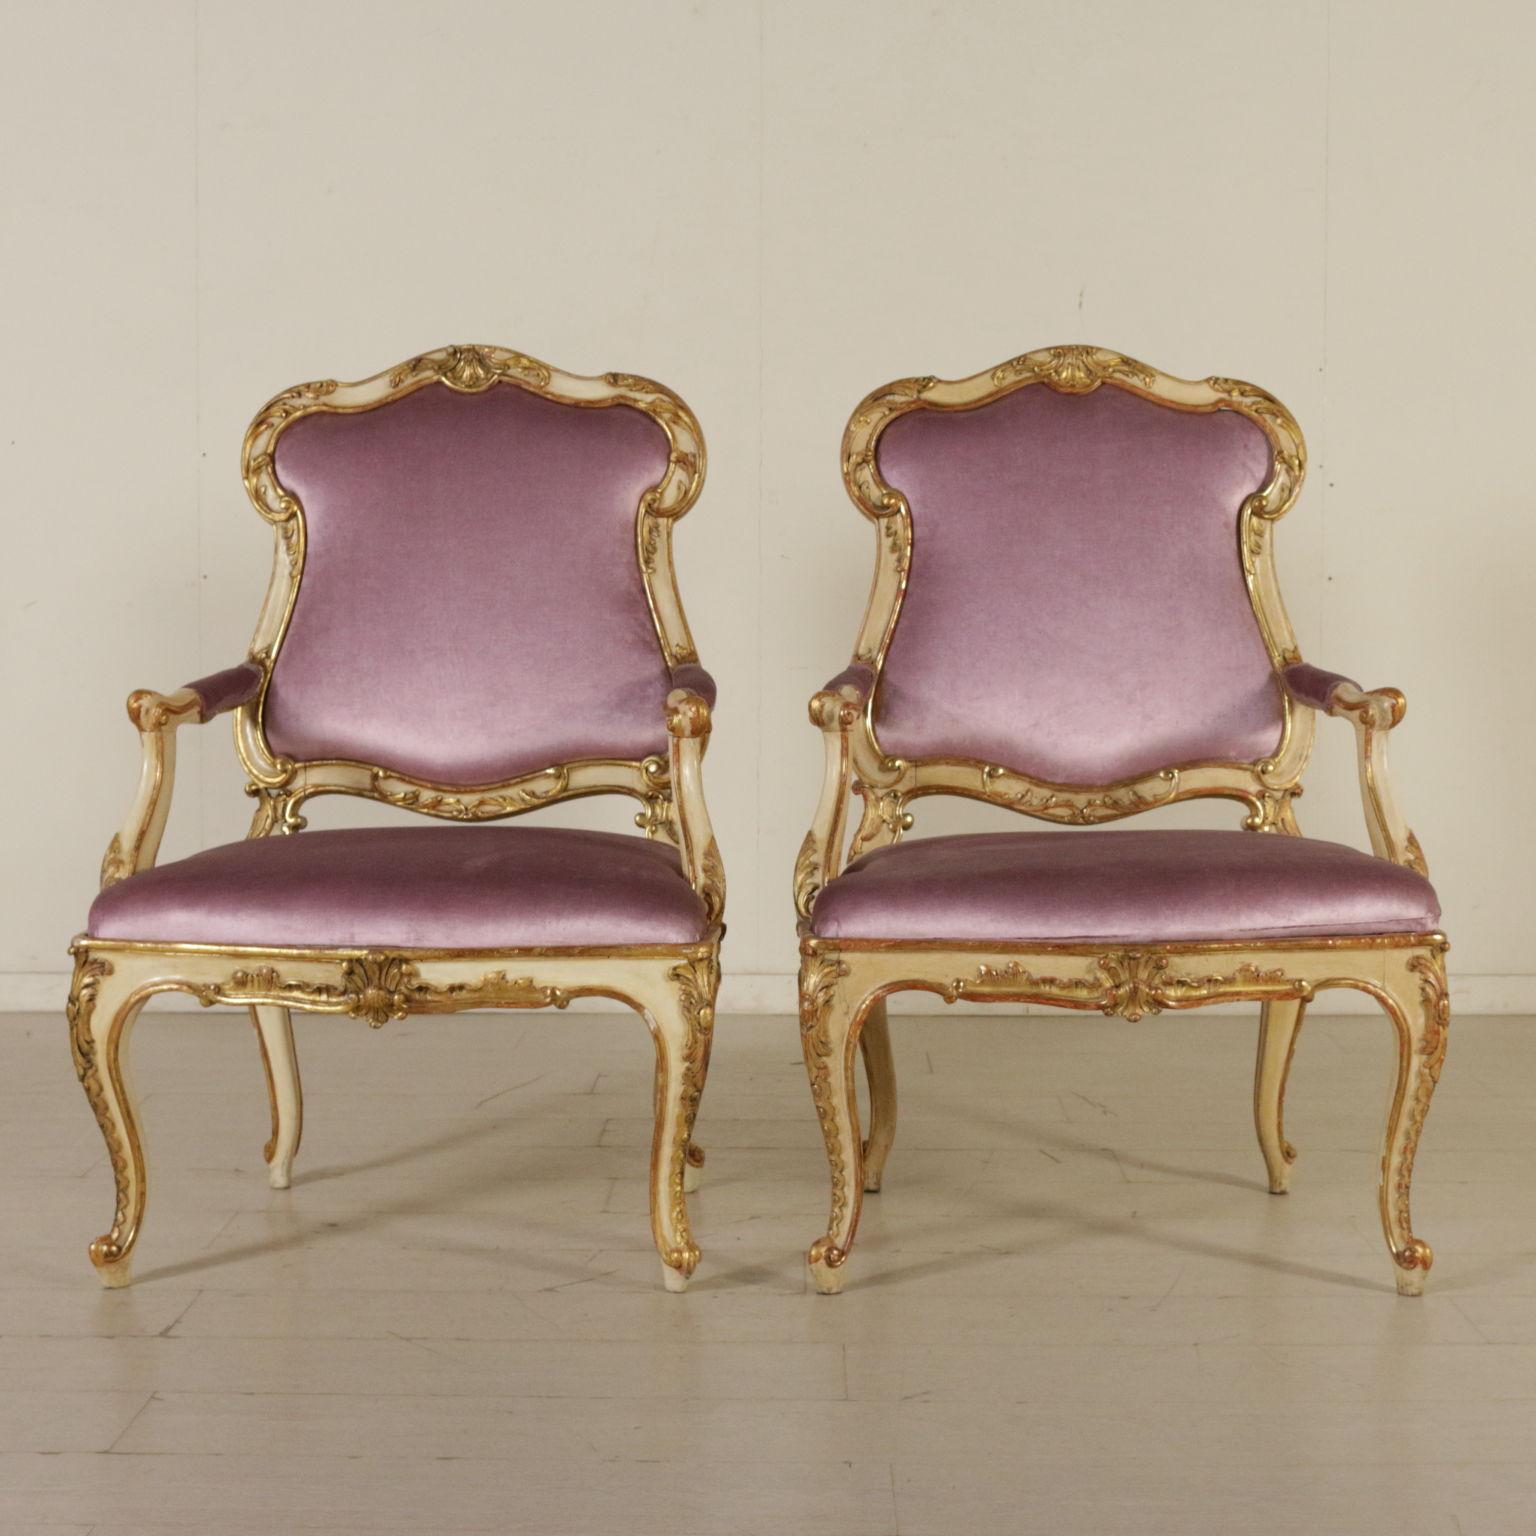 Baroque Revival Sofa and Pair of Armchairs